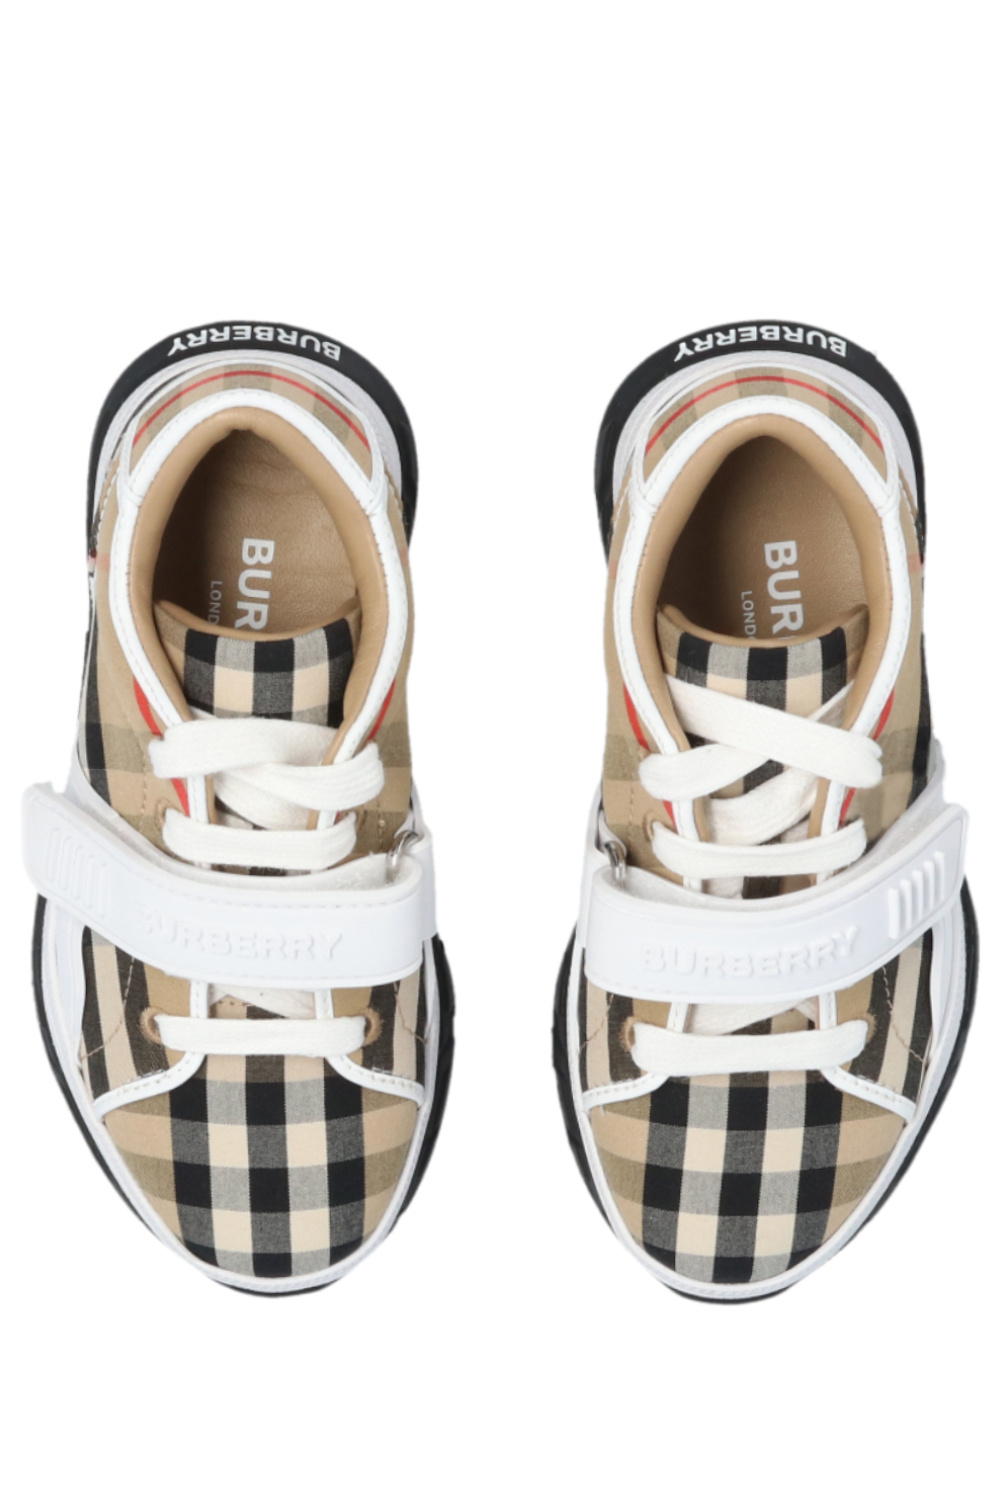 Burberry Kids Nike Air Force 1 07 LV8 3 Removable Swoosh sneakers